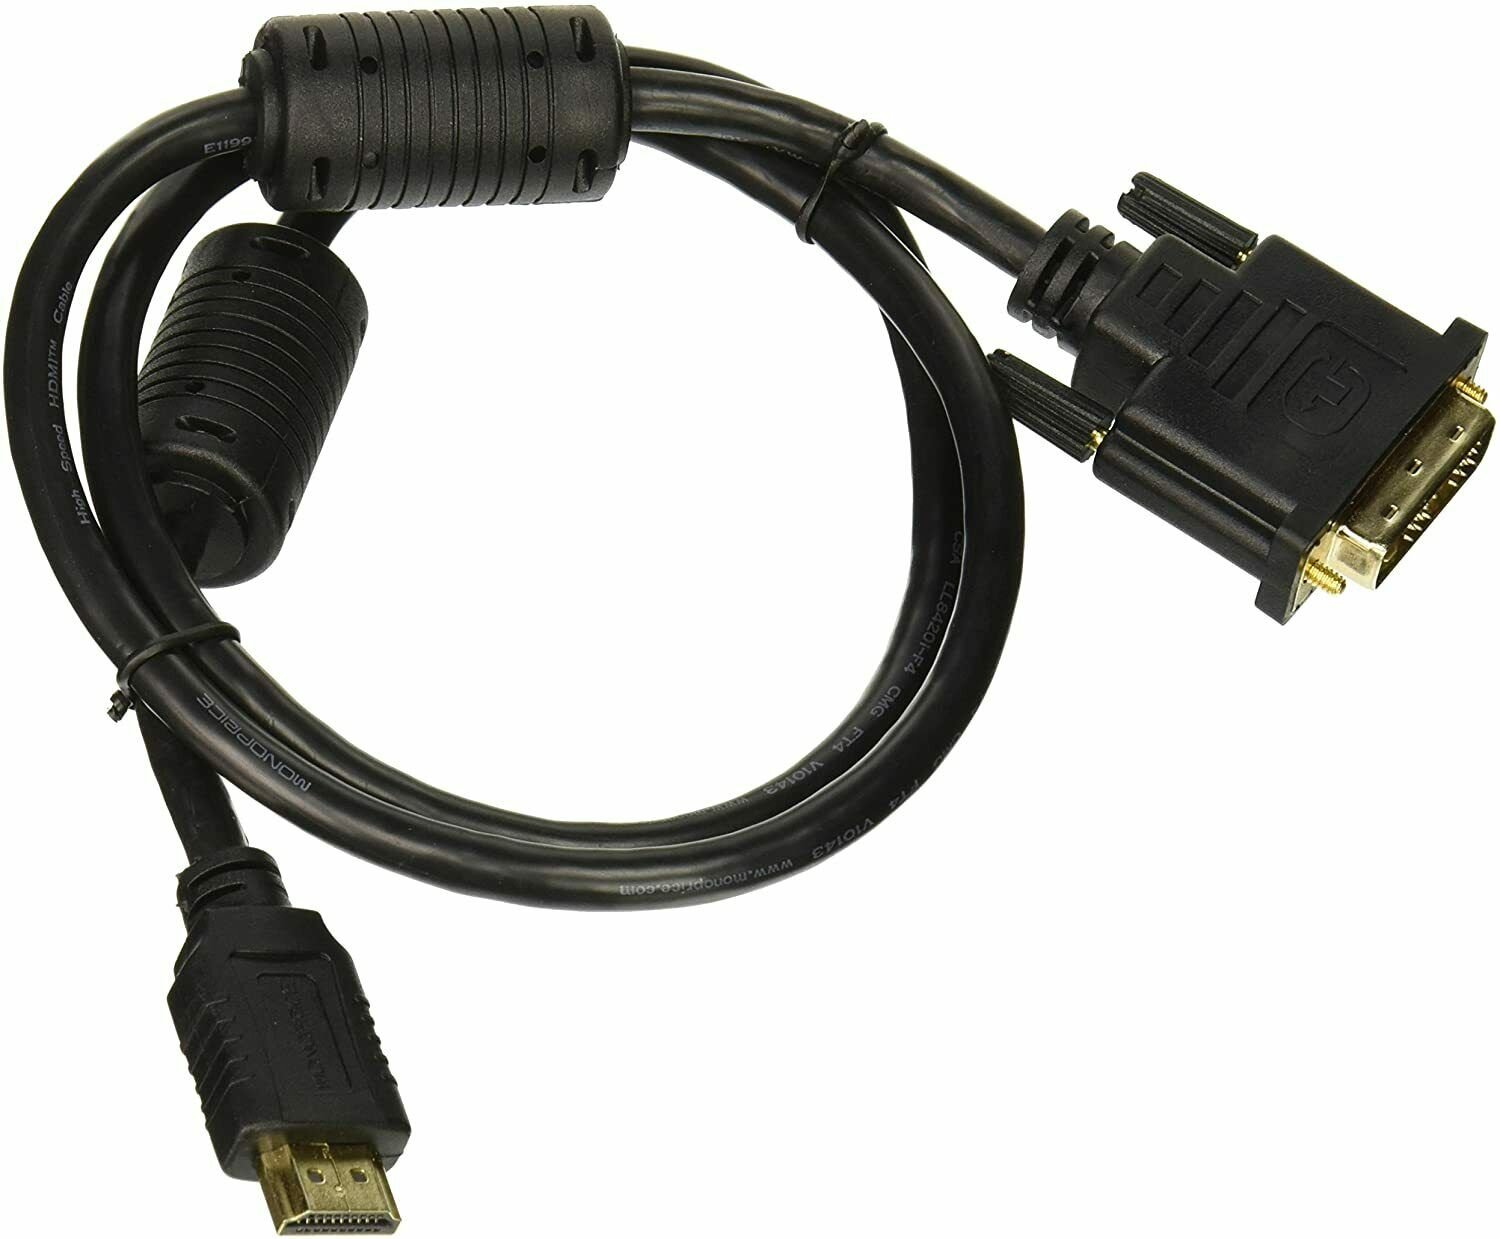 NEW Monoprice 102661 3' HDMI to DVI-D Adapter Cable *~* FAST FREE SHIPPING *~*